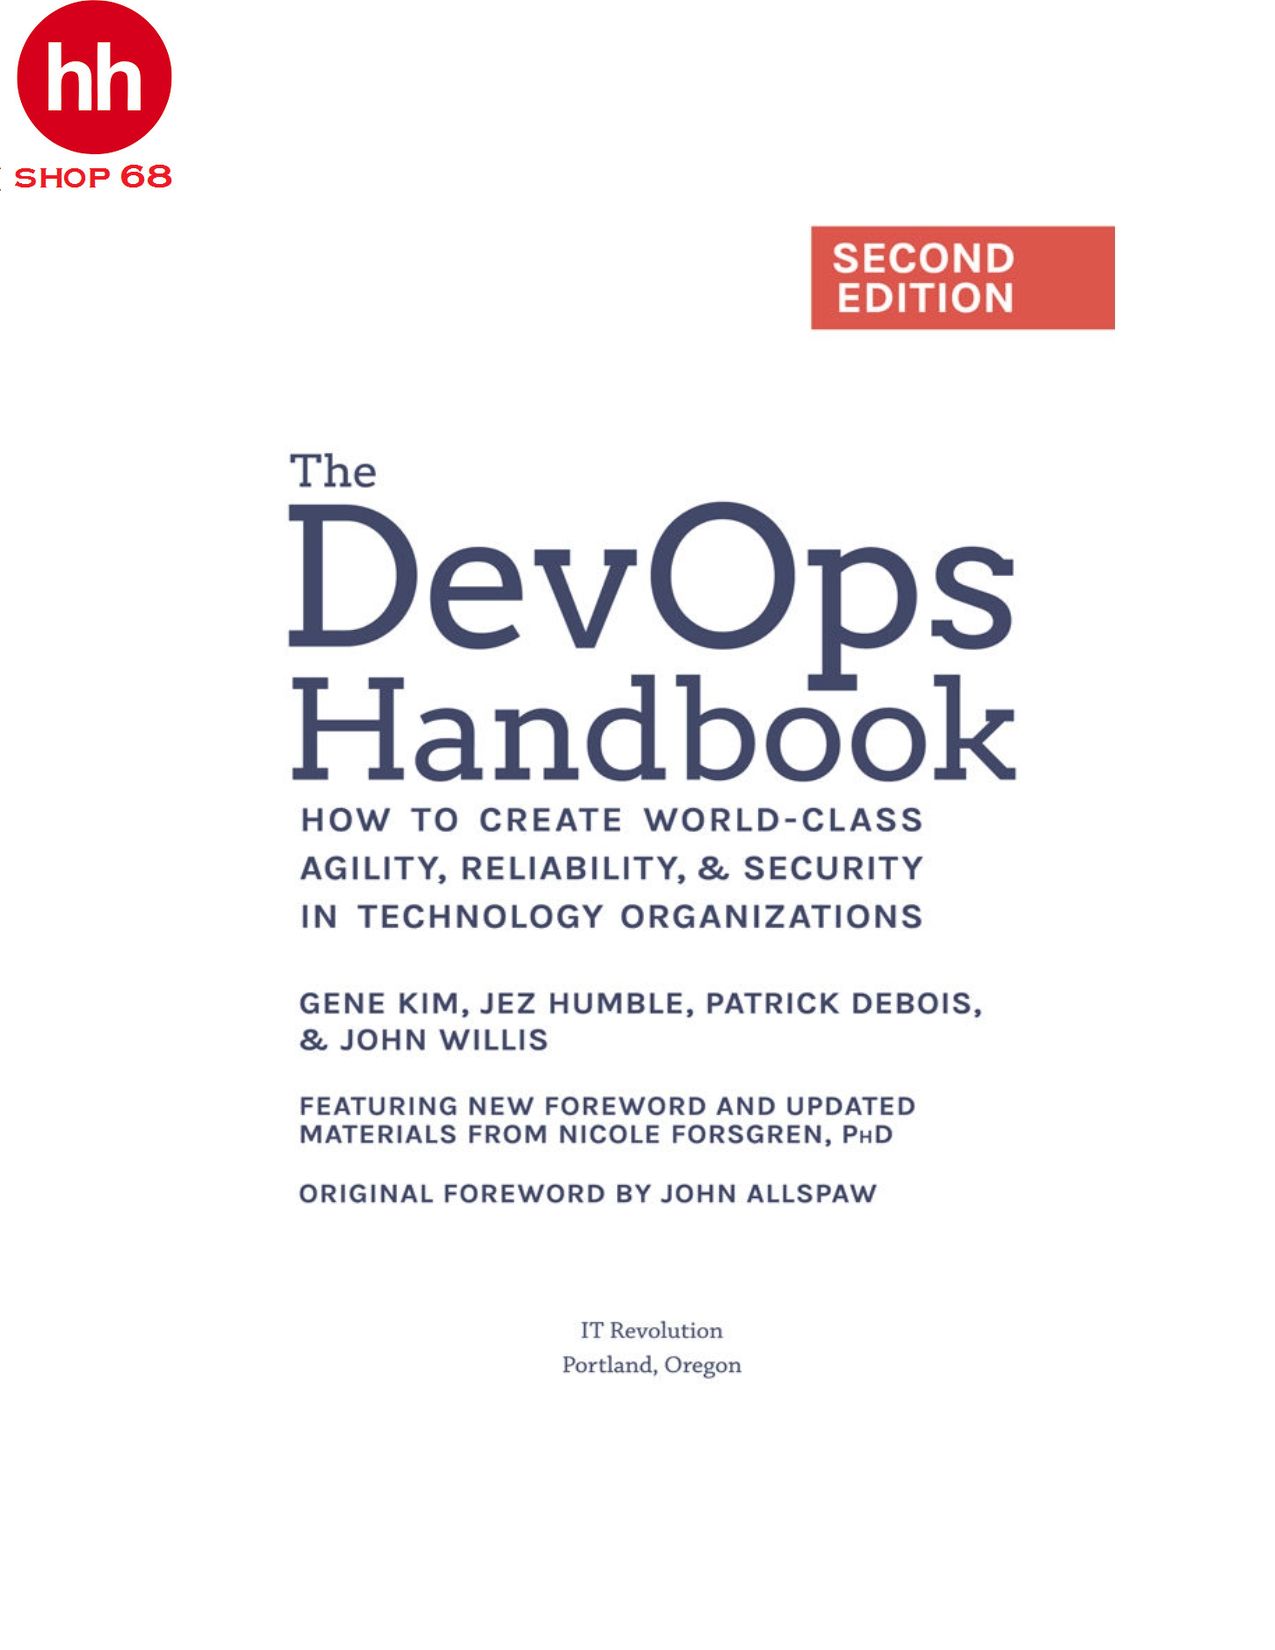 Accelerate: The Science of Lean Software and DevOps